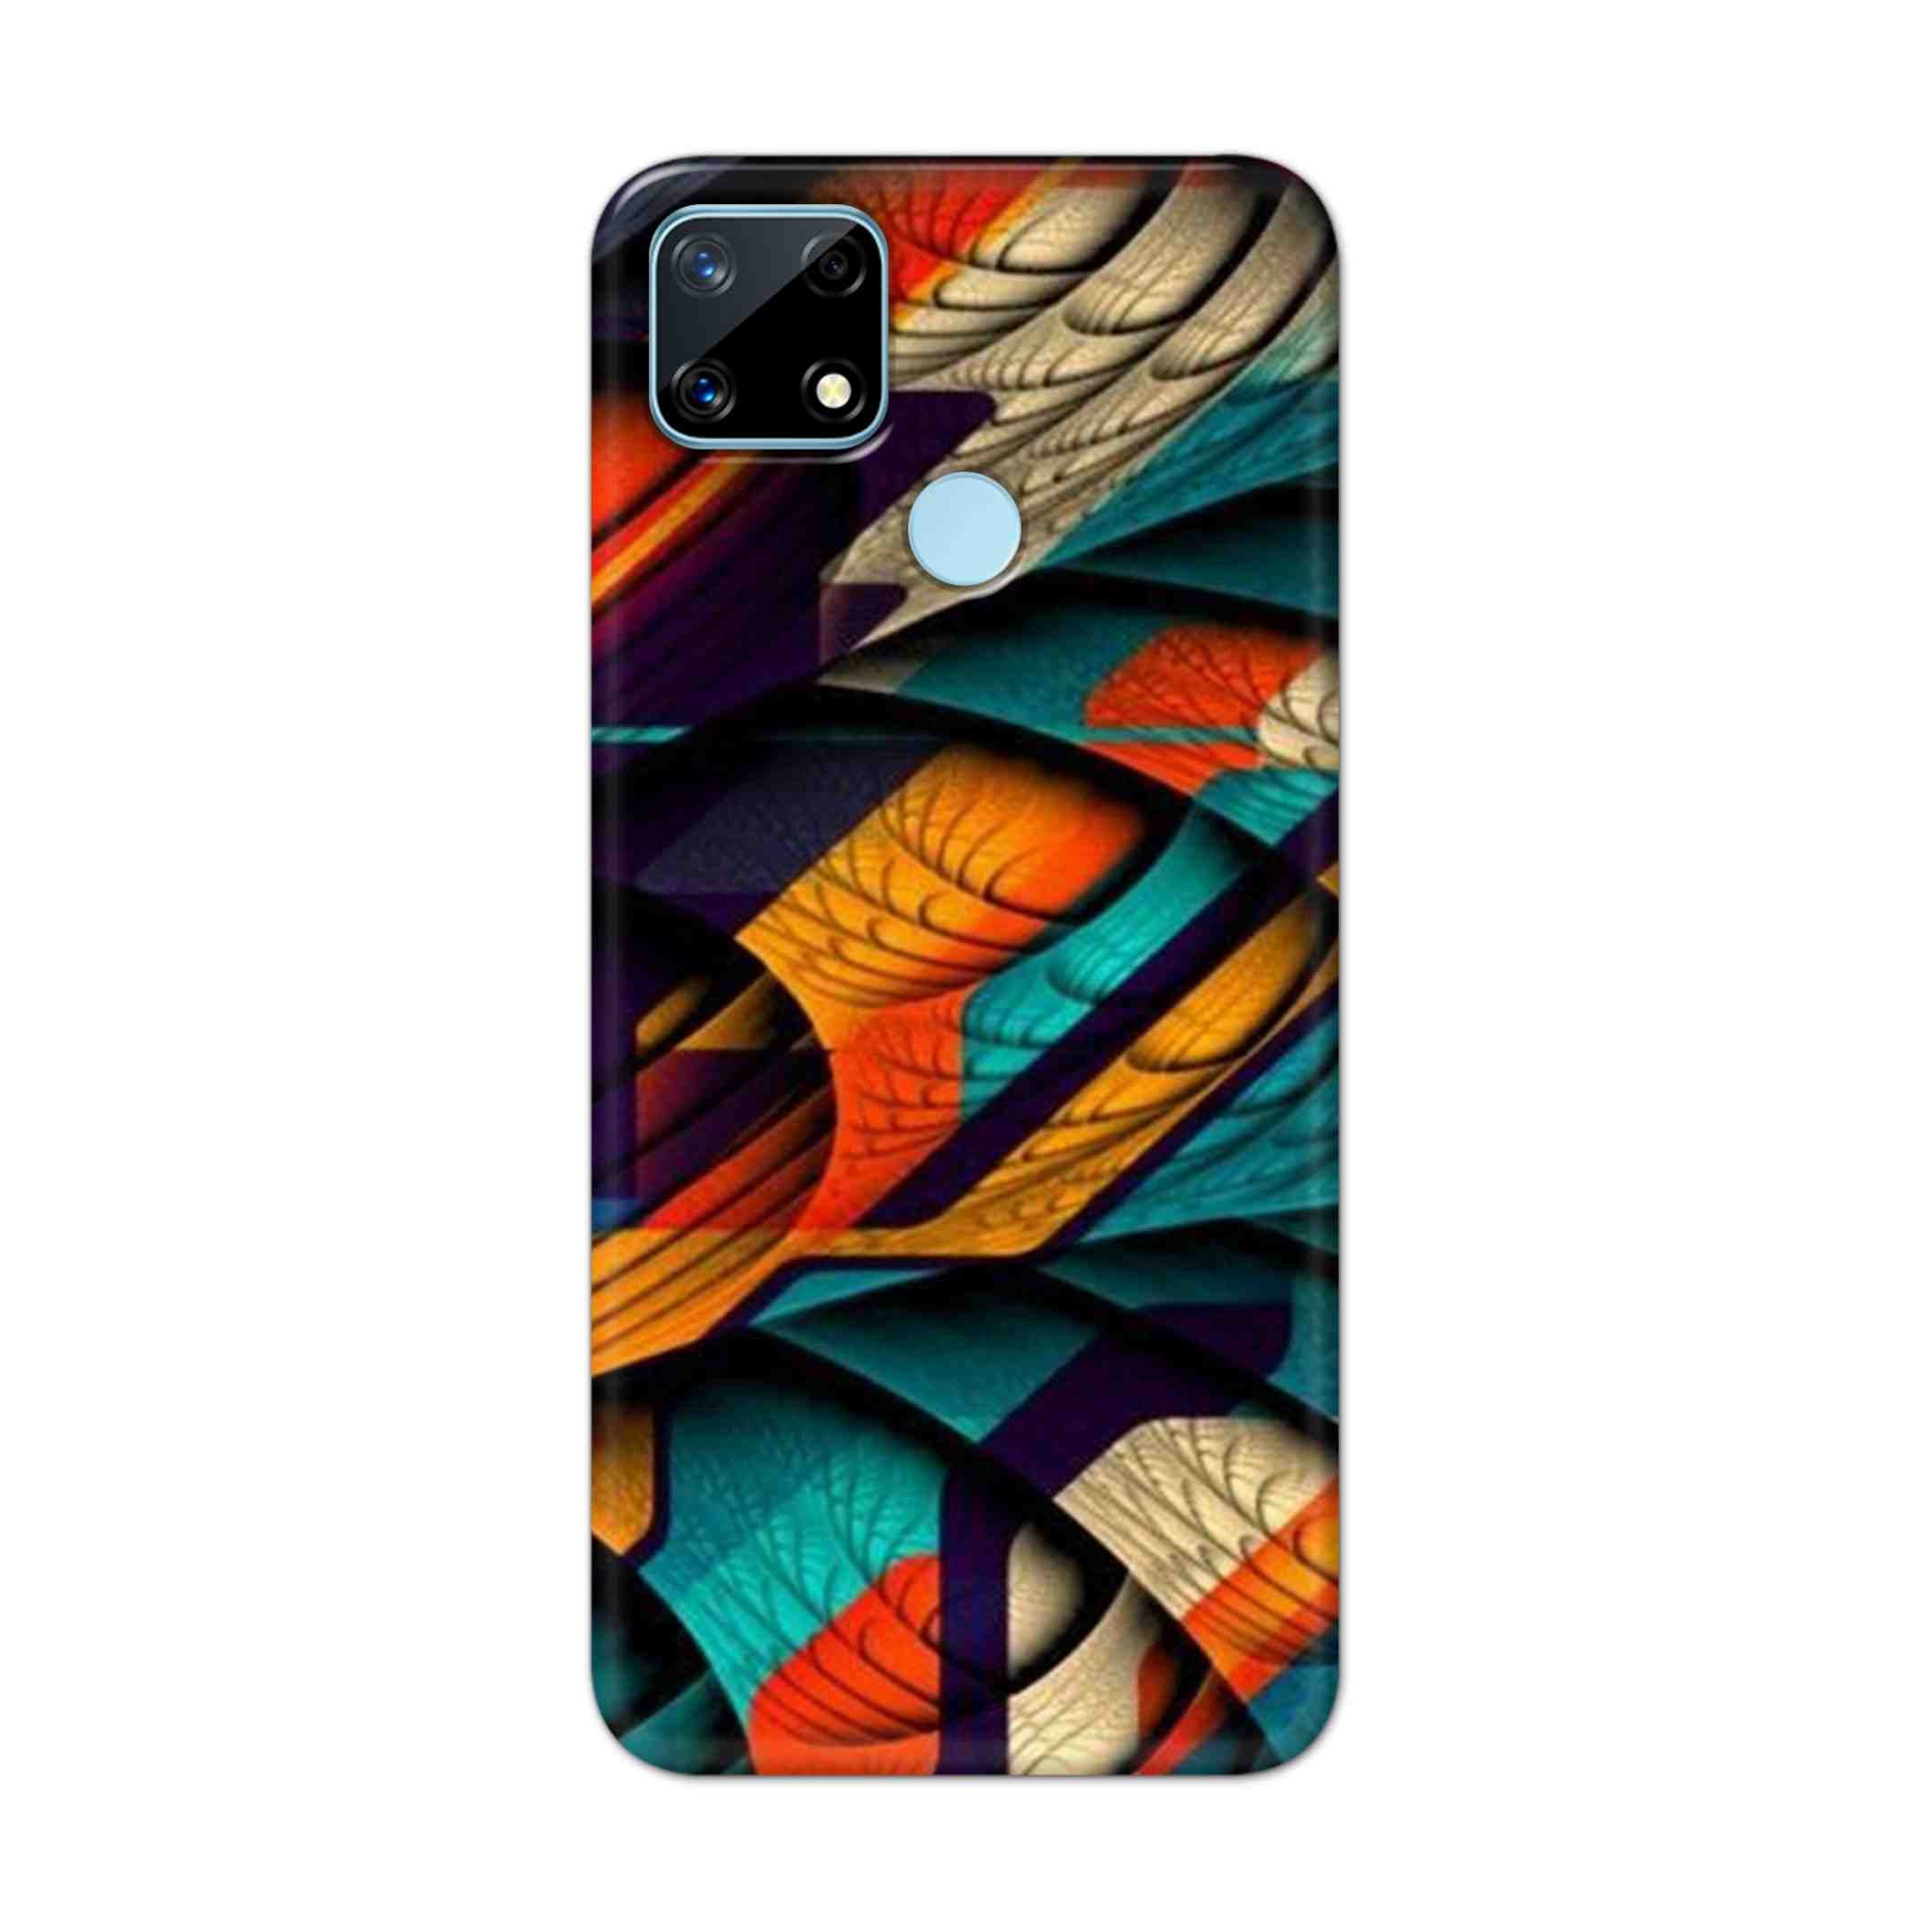 Buy Colour Abstract Hard Back Mobile Phone Case Cover For Realme Narzo 20 Online